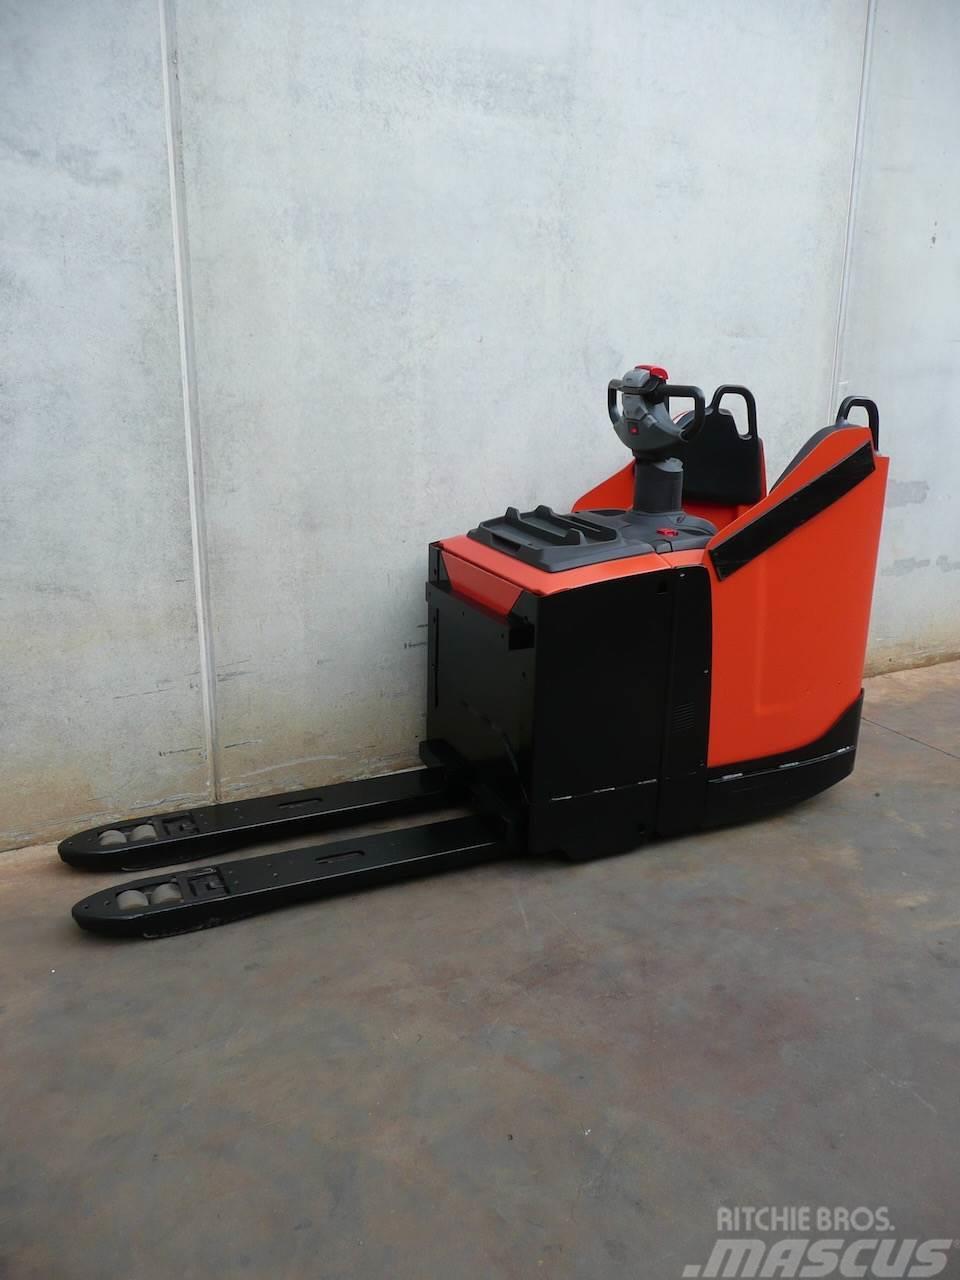 BT LPE 250 Low lifter with platform